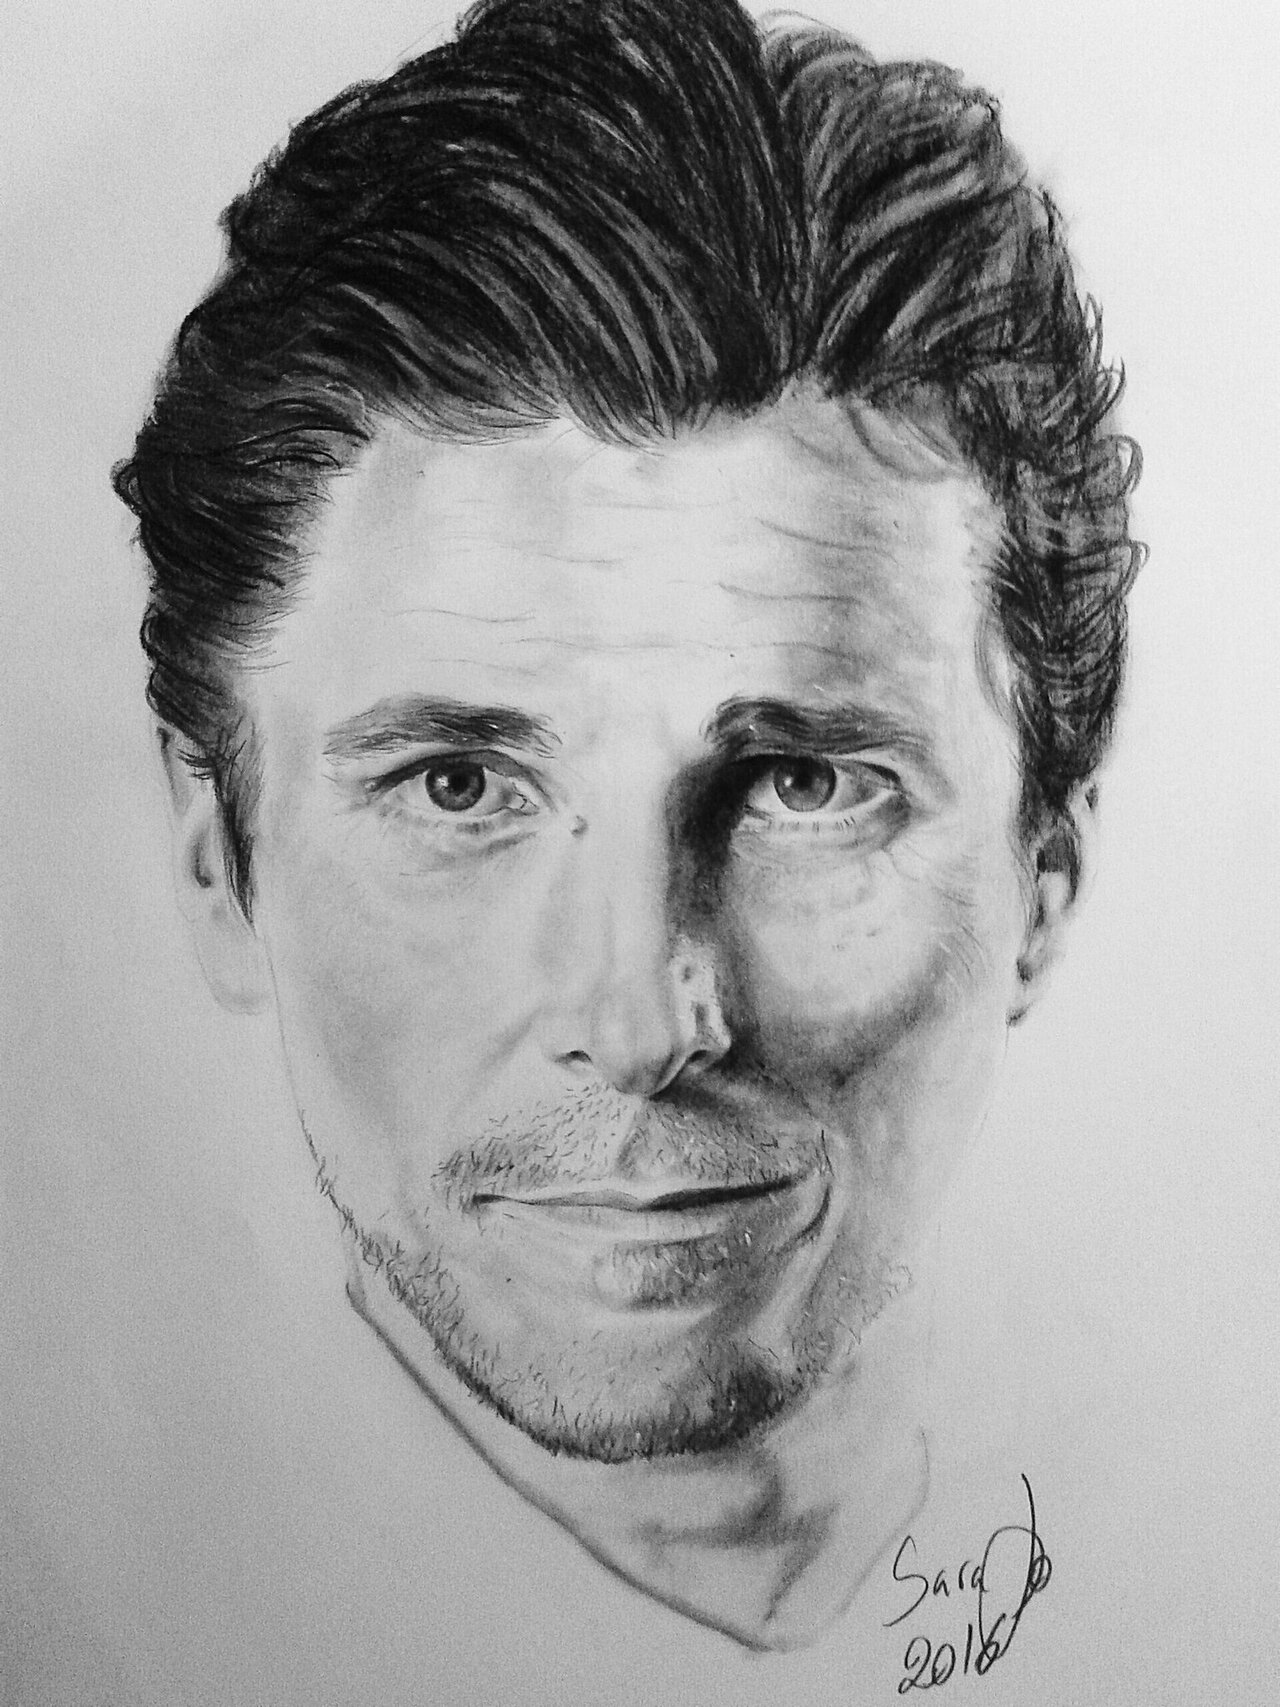 Here we go with the first drawing in 2016! Christian Bale  #ChristianBale #Art #Portrait #BedtimeSketch https://t.co/DWz06hxARO